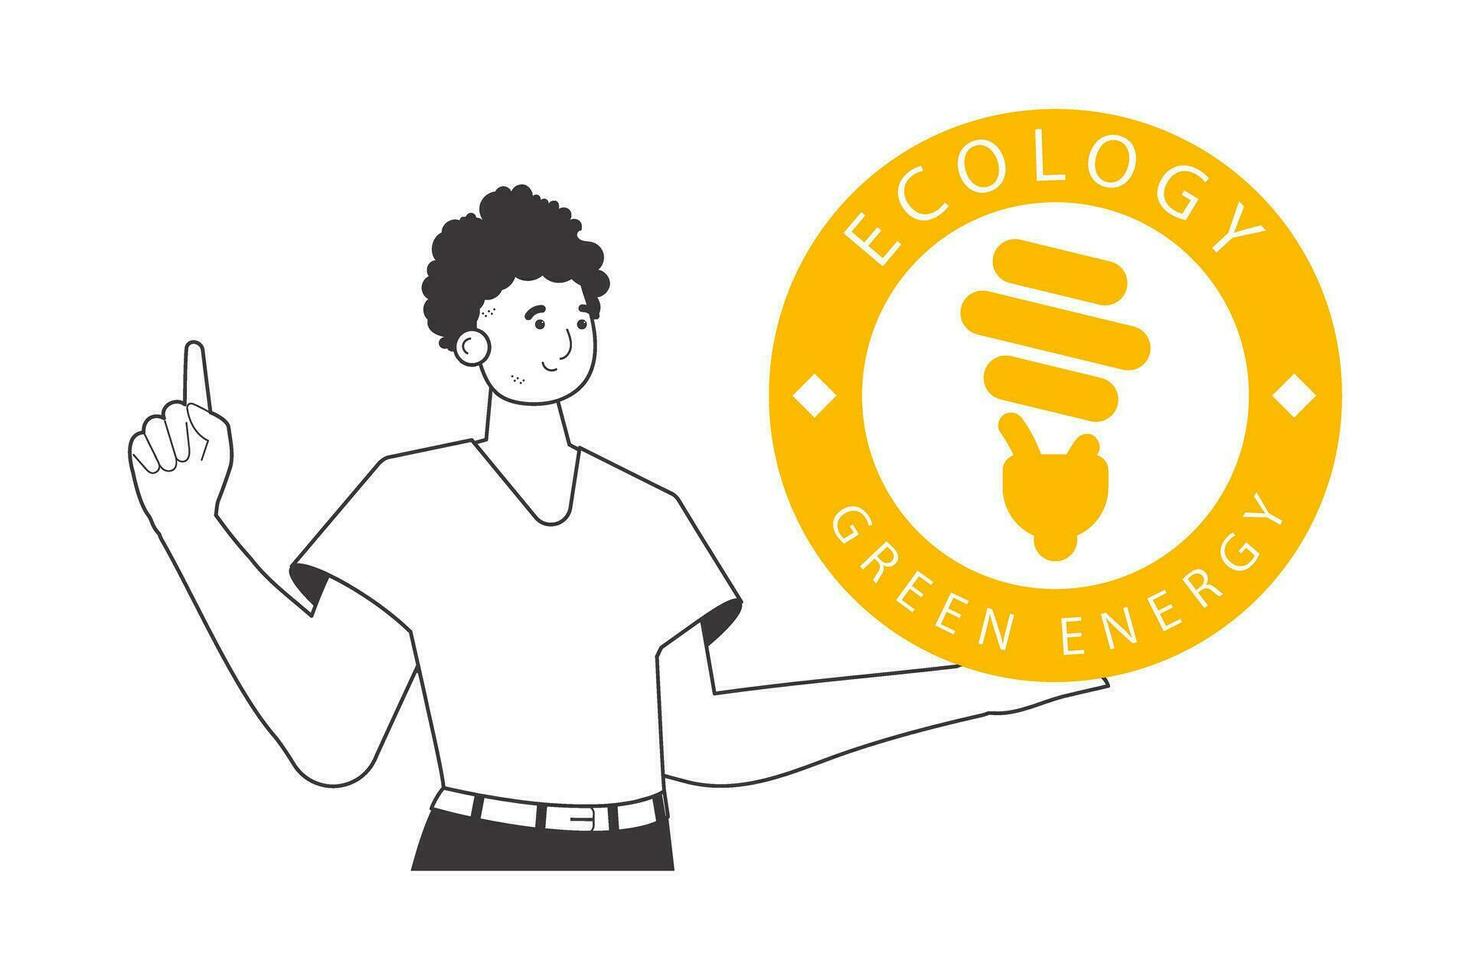 A man holds a green energy logo in his hand. Linear style. Isolated on white background. Vector illustration.